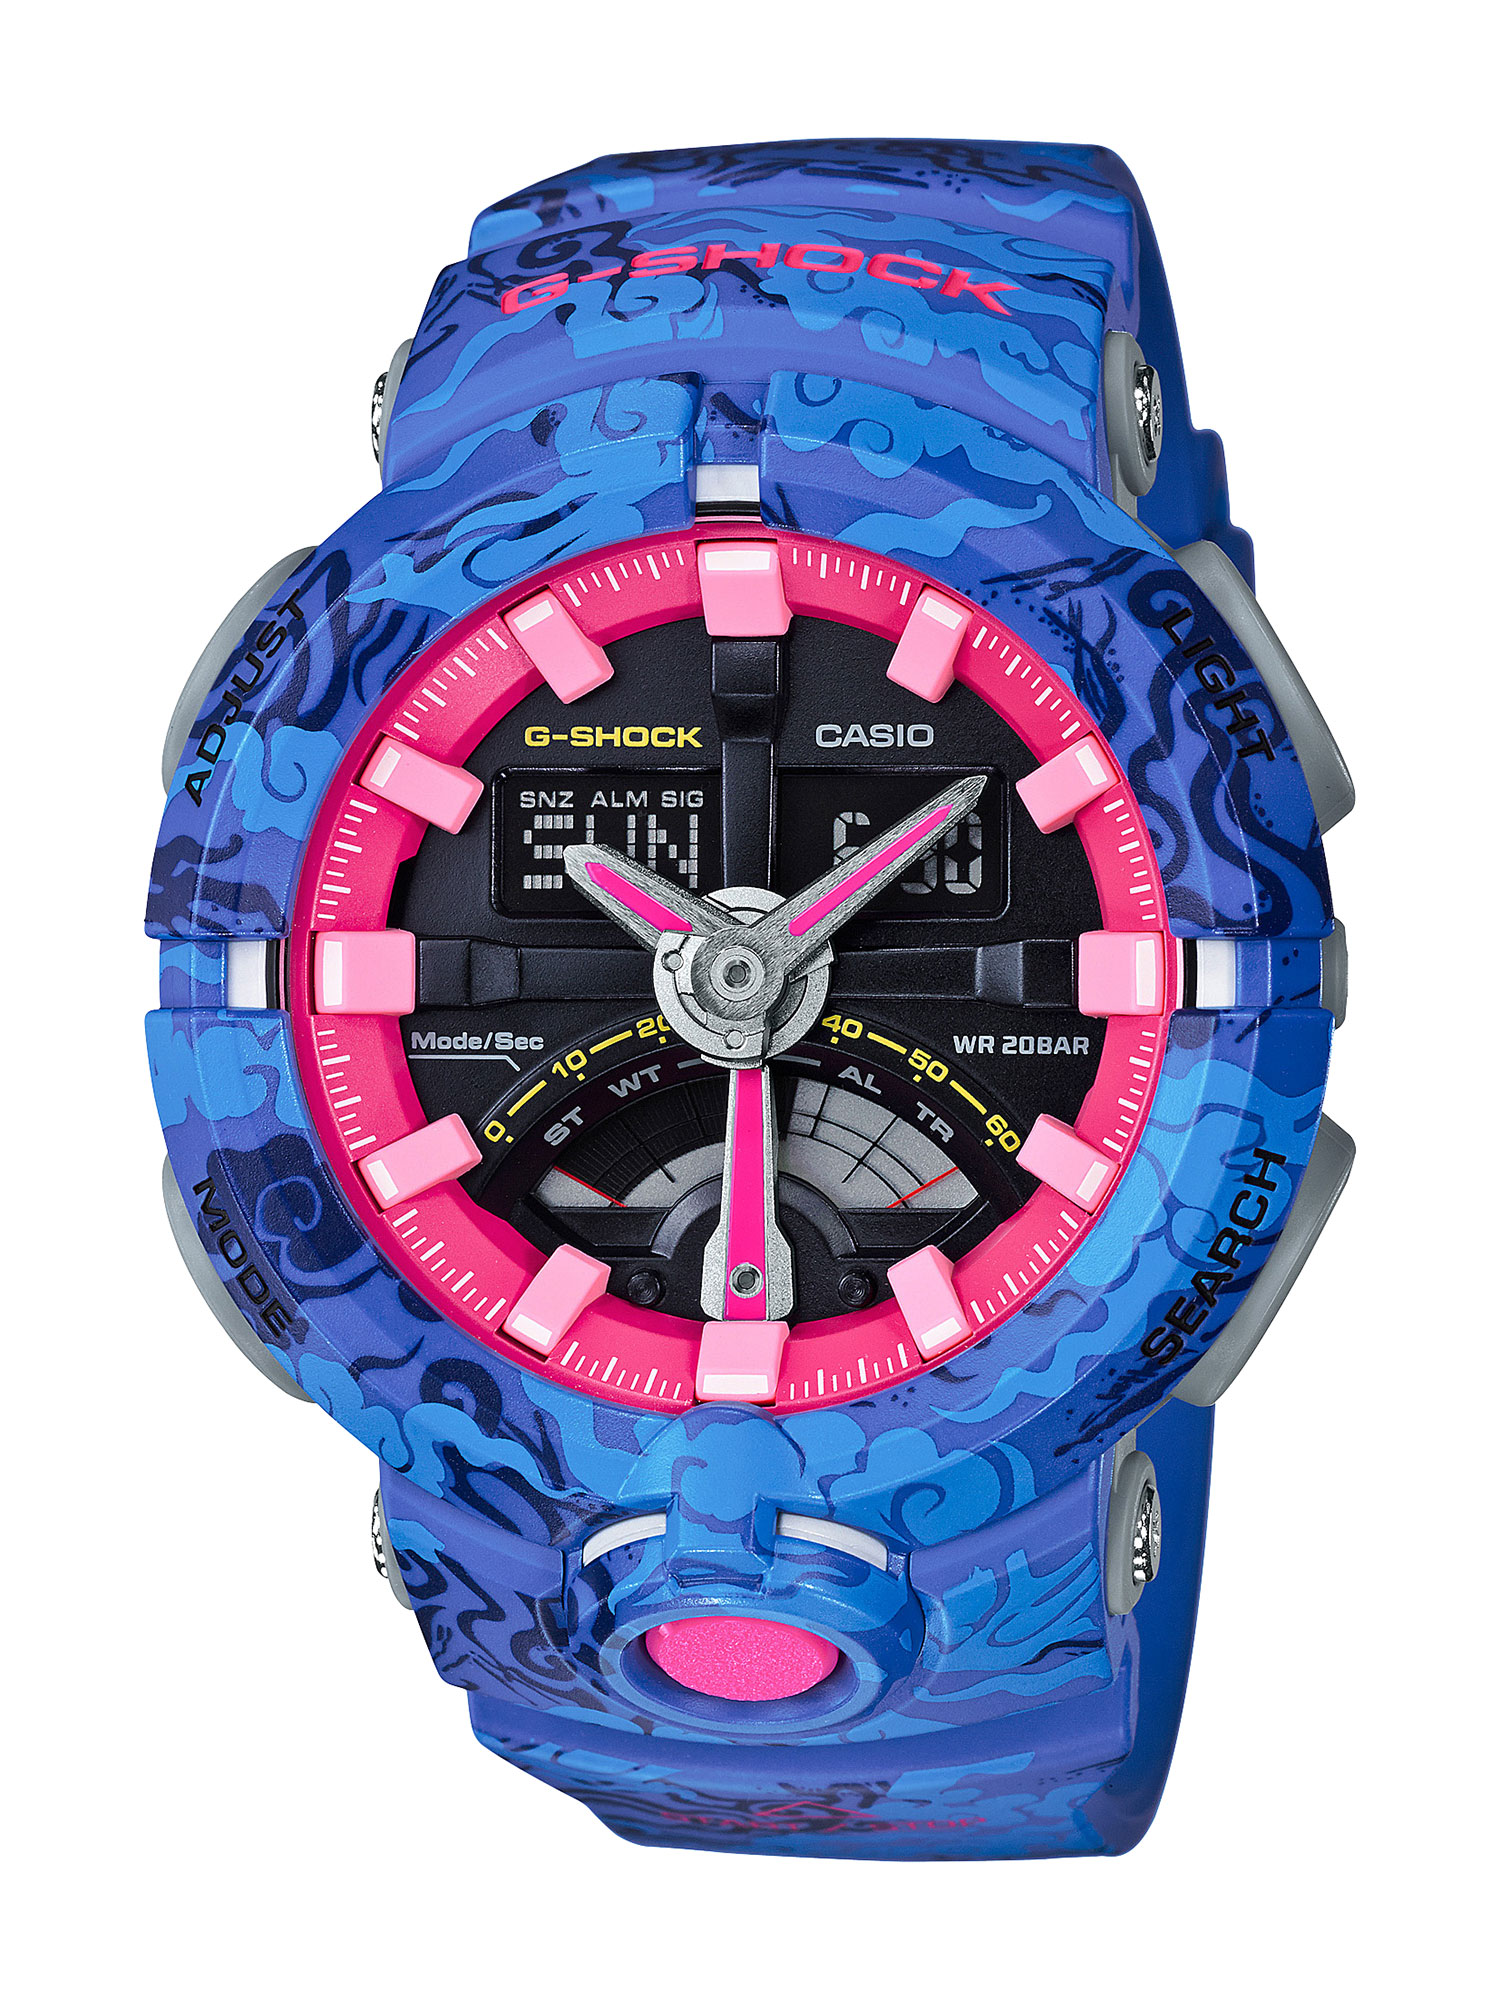 CASIO Releases G-SHOCK Celestial Guardian Series